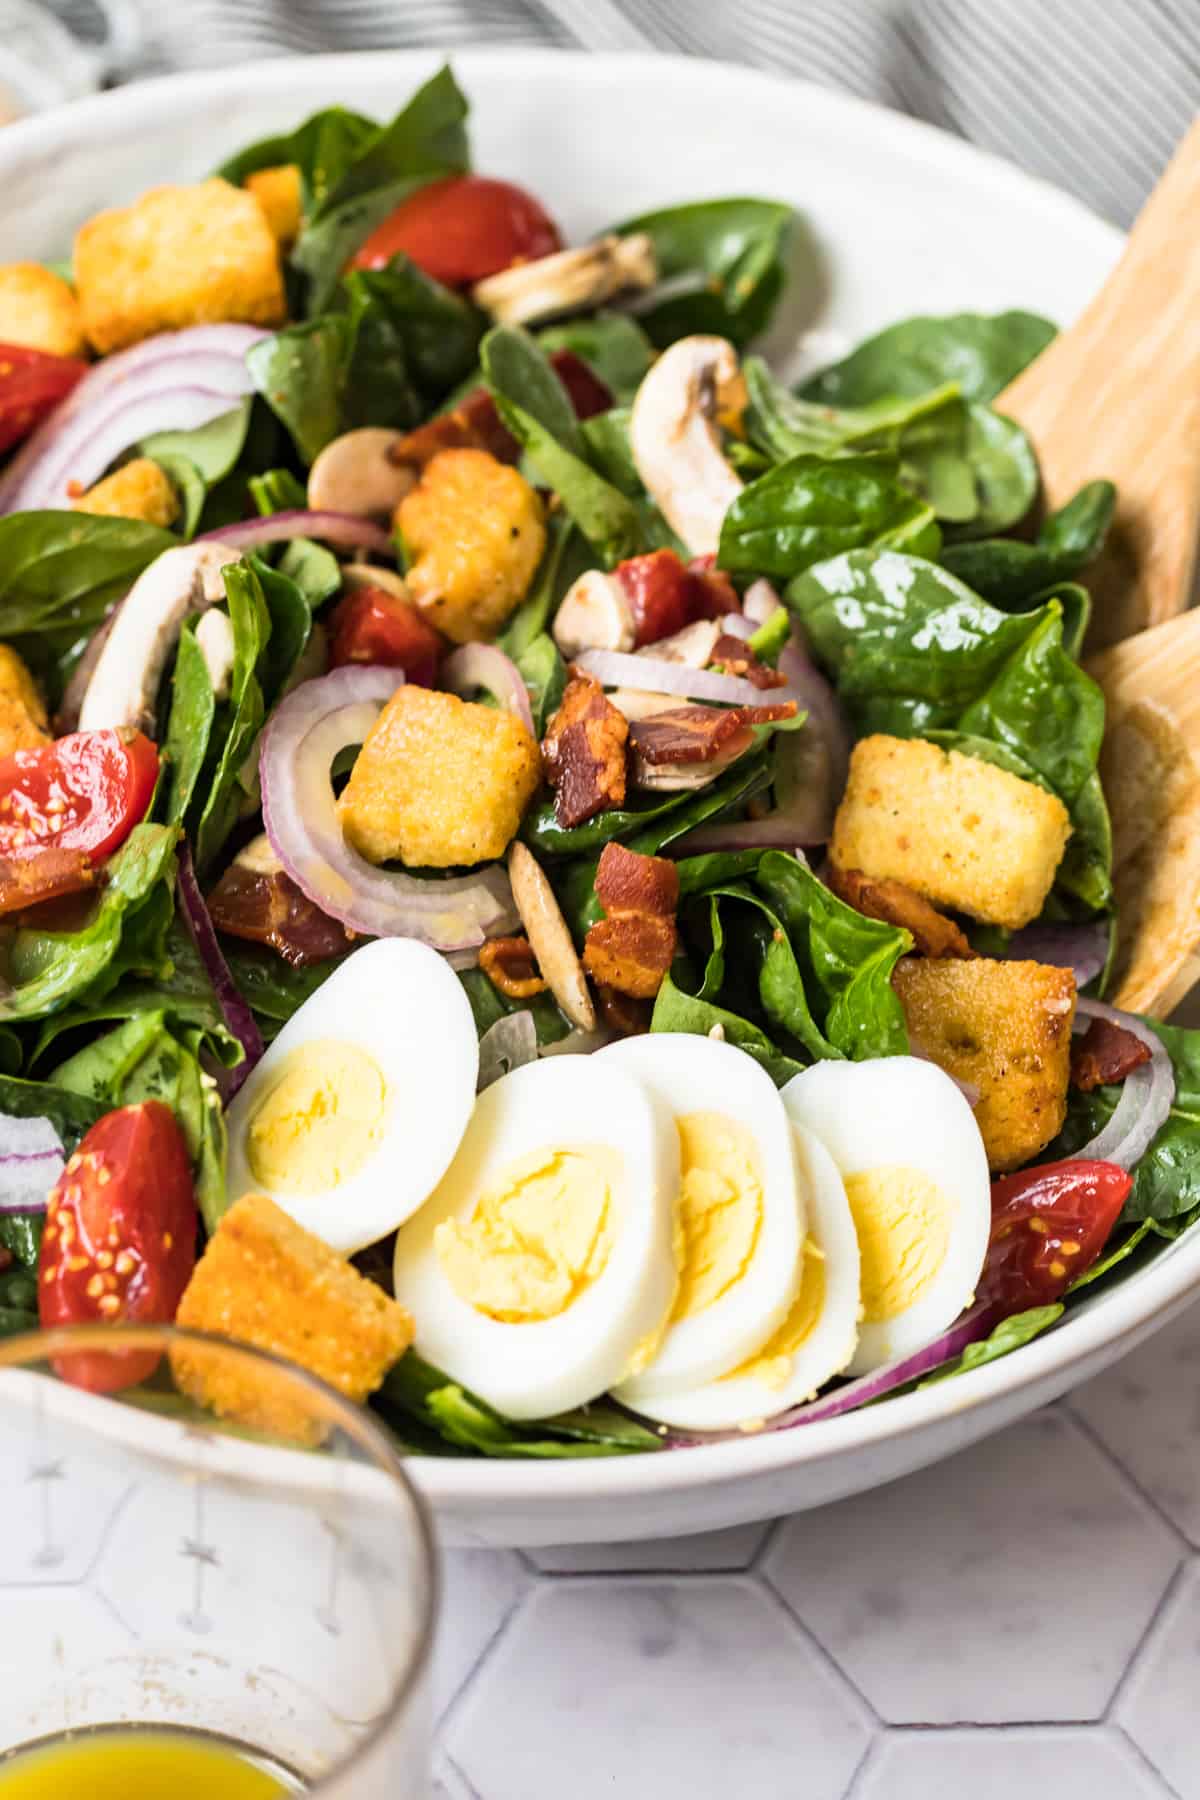 Spinach Salad Recipe with Bacon (Spinach Salad Dressing) - The Cookie ...